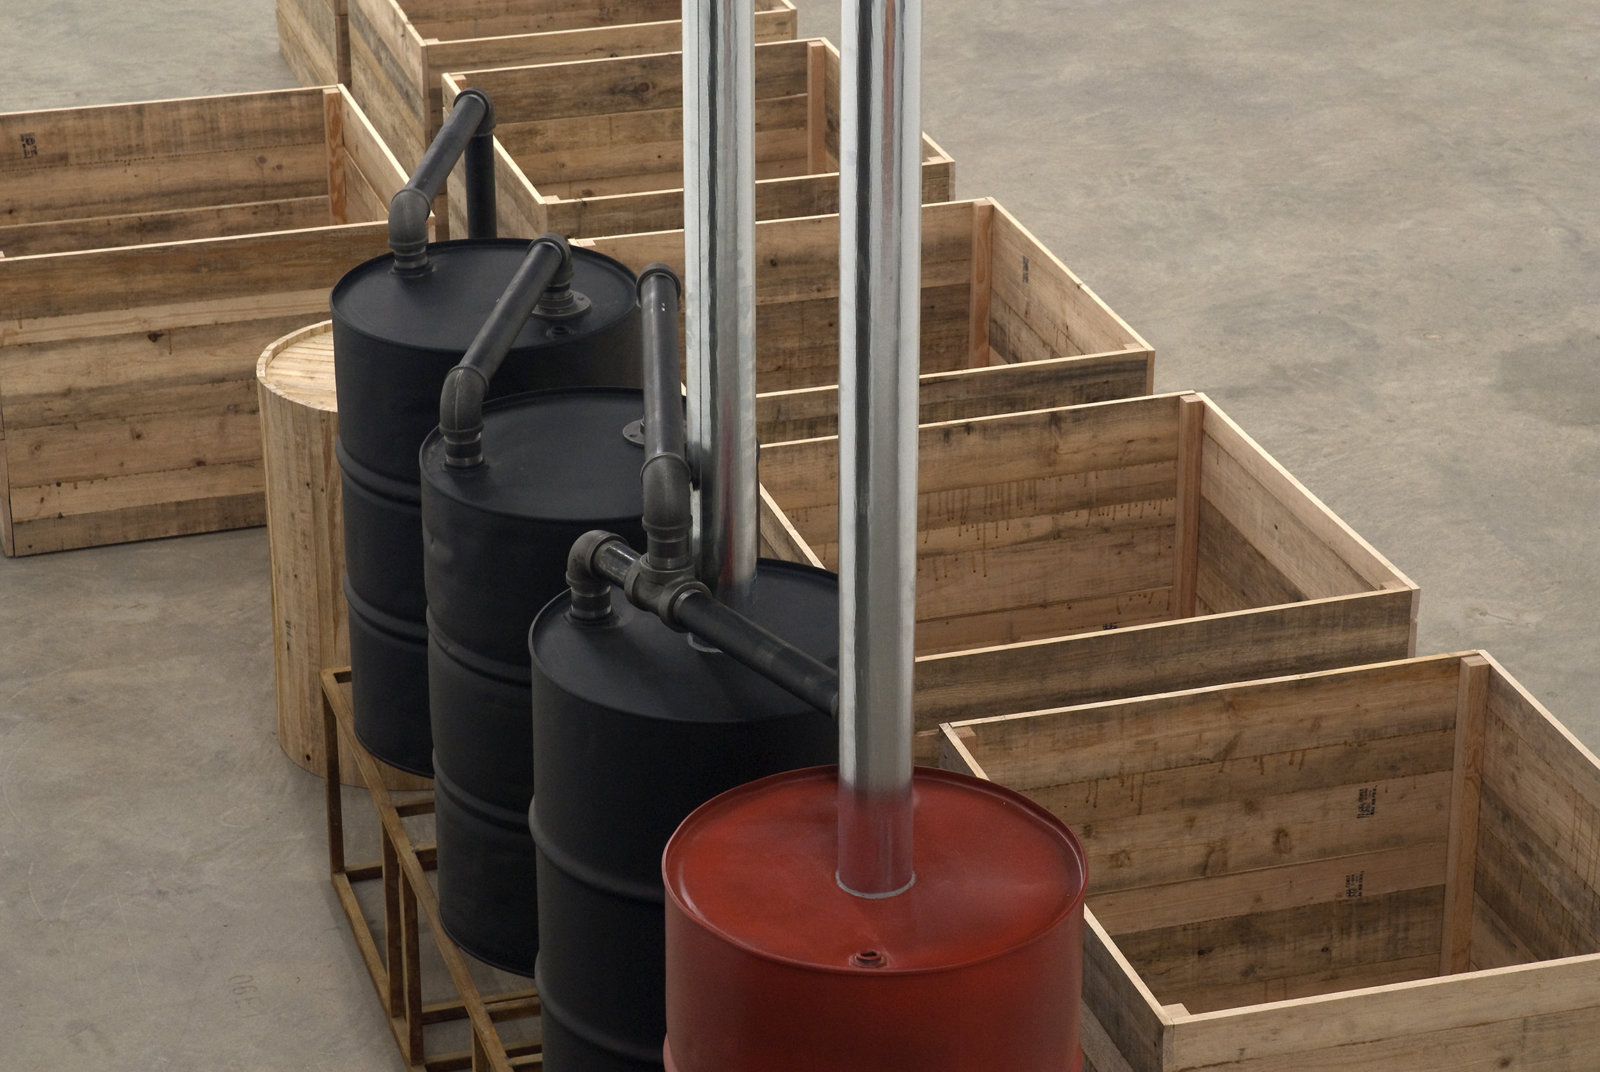 ​Myfanwy MacLeod, Everything Seems Empty Without You, 2009, metal oil drums, metal sand, metal pipes, wooden boxes, wooden barrel, 118 x 332 x 94 in. (300 x 843 x 239 cm) by 